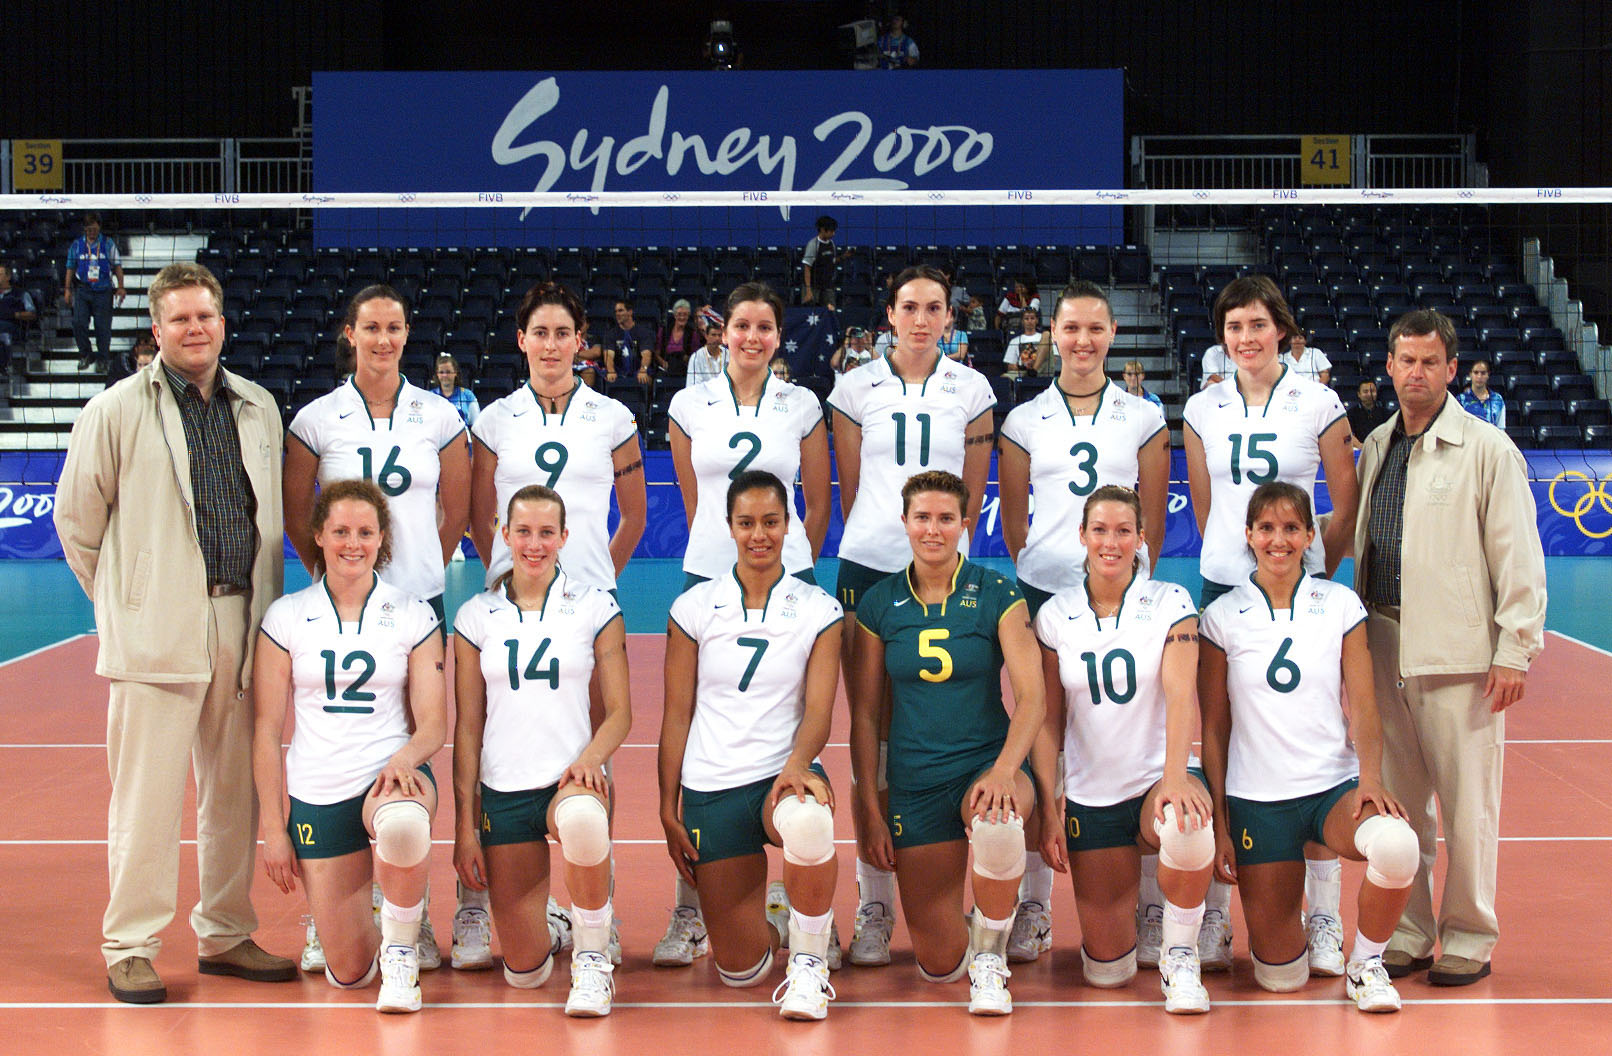 SYDNEY 2000 OLYMPIA VOLLEYBALL  ................Sport-Pin 169a